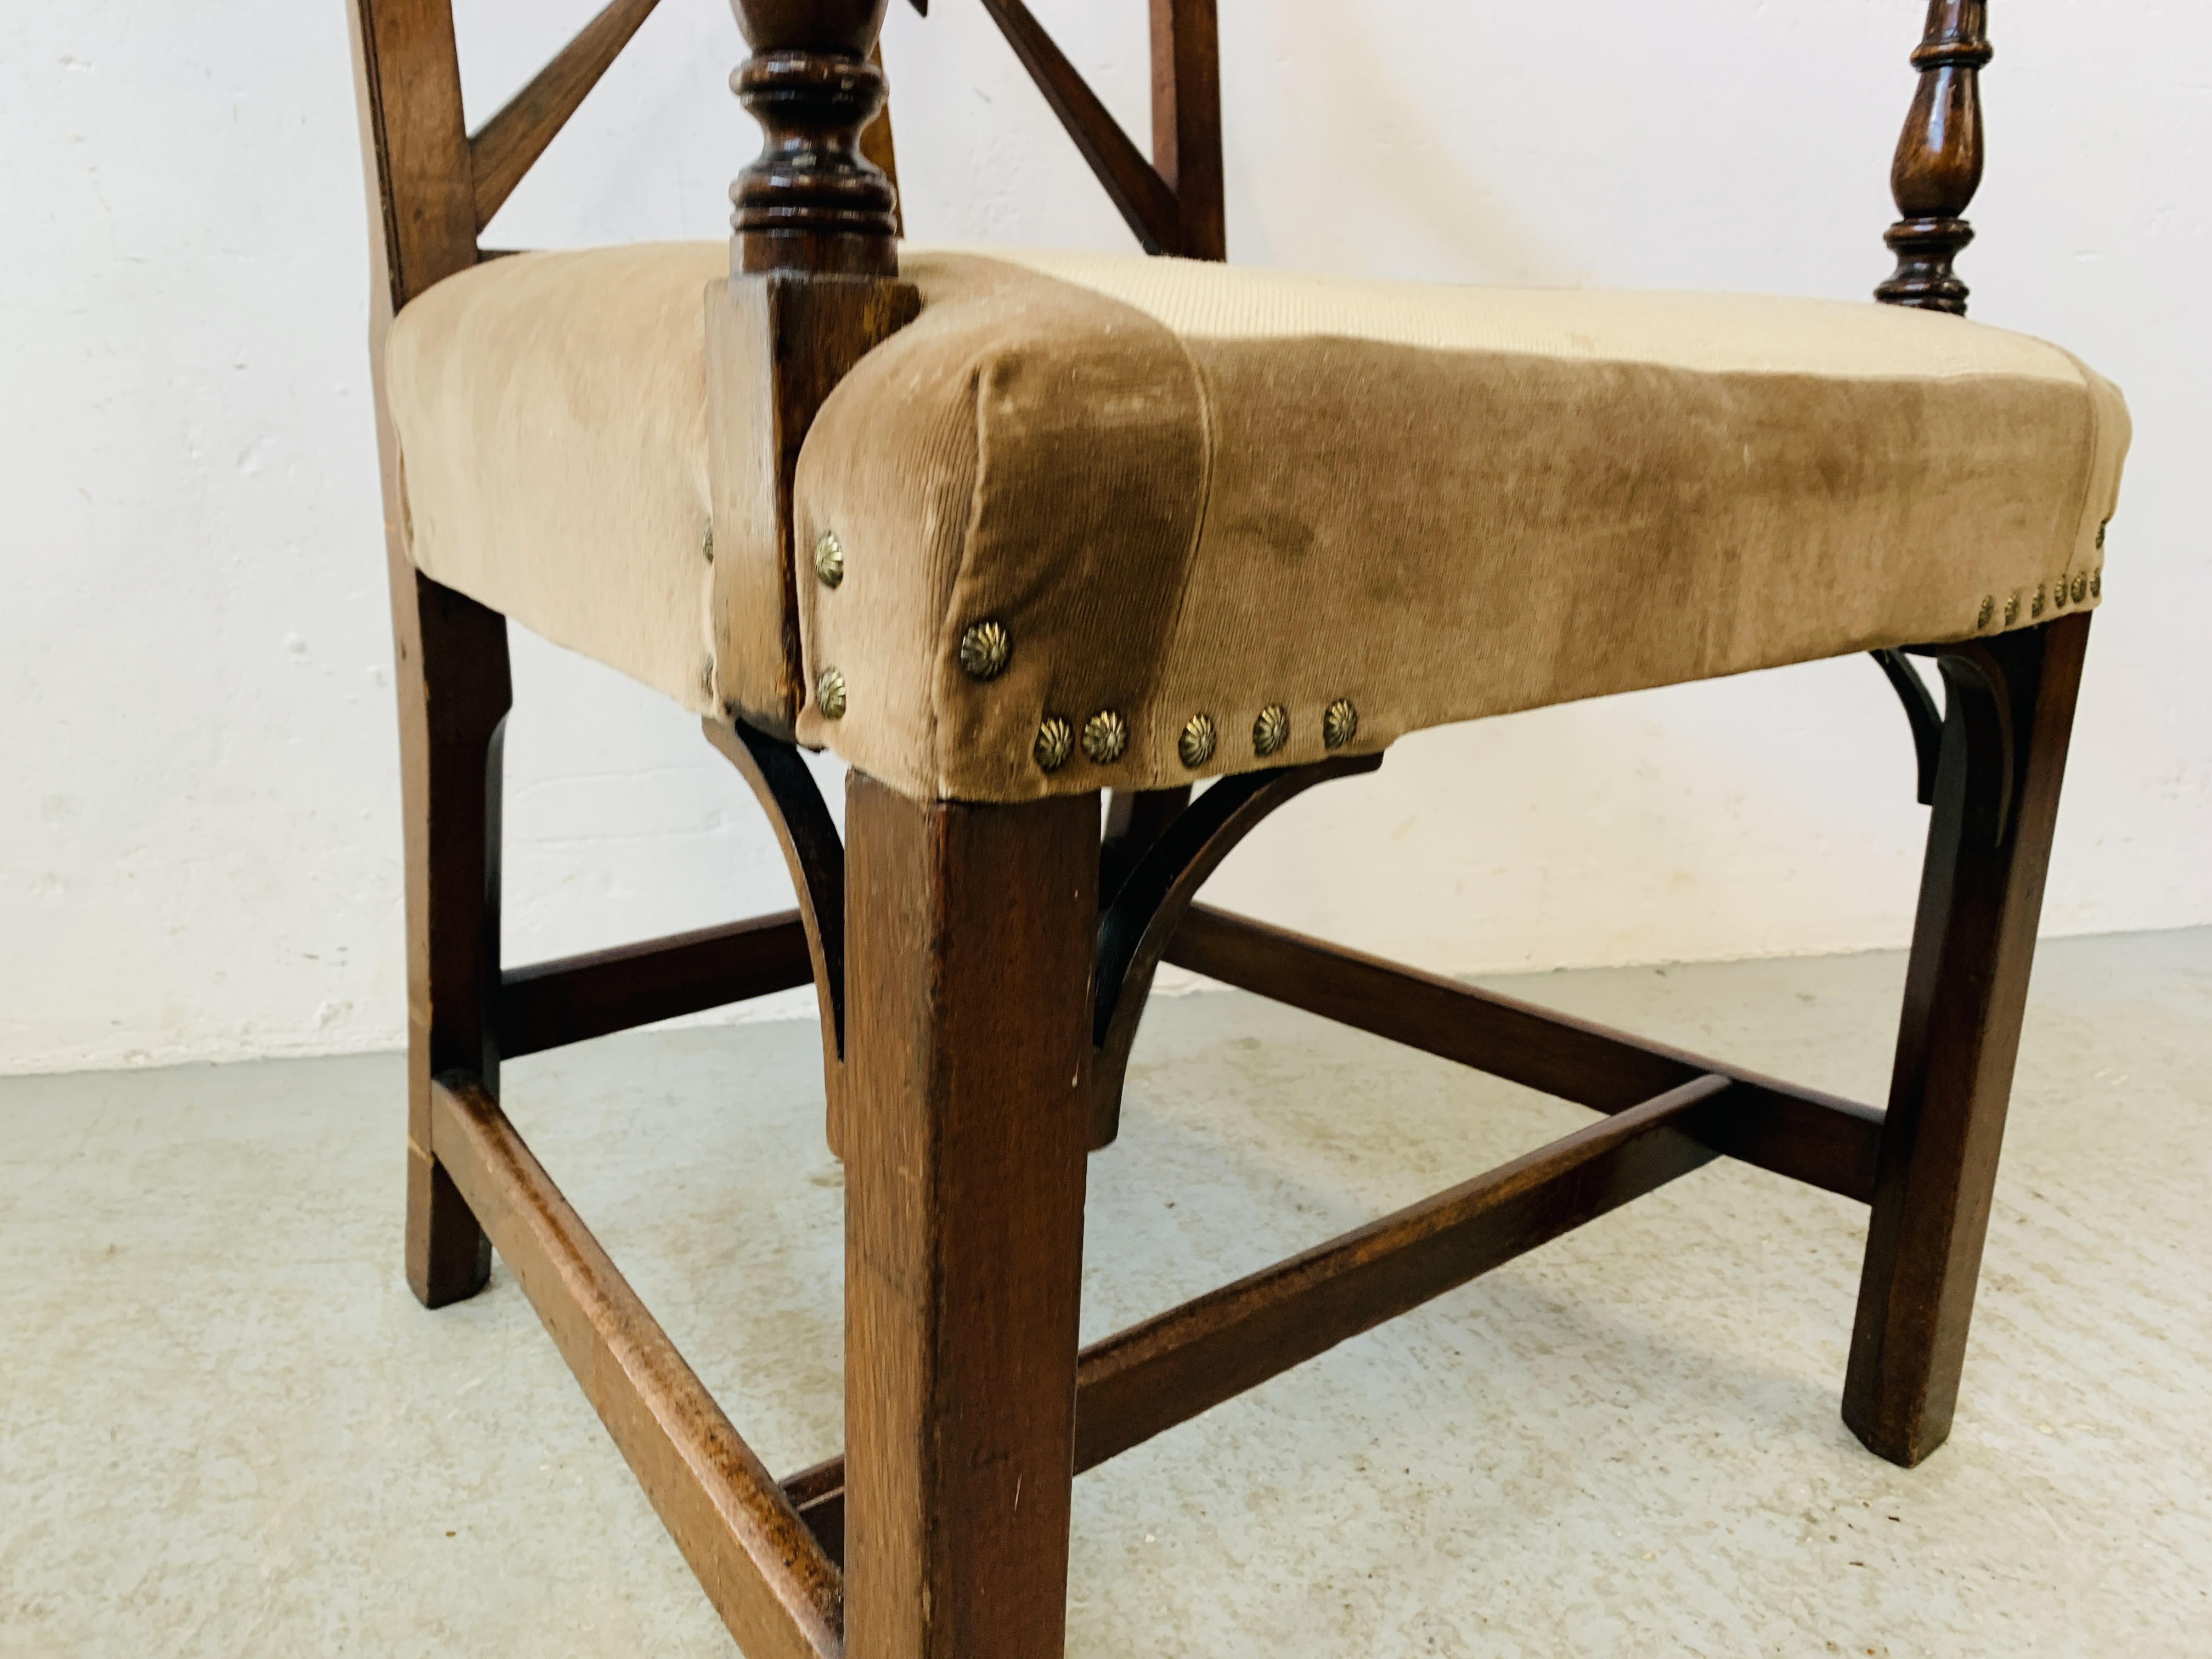 A PERIOD MAHOGANY ELBOW CHAIR WITH UNUSUAL FLOWERHEAD DESIGN TO BACK AND EMBROIDED SEAT - Image 4 of 5